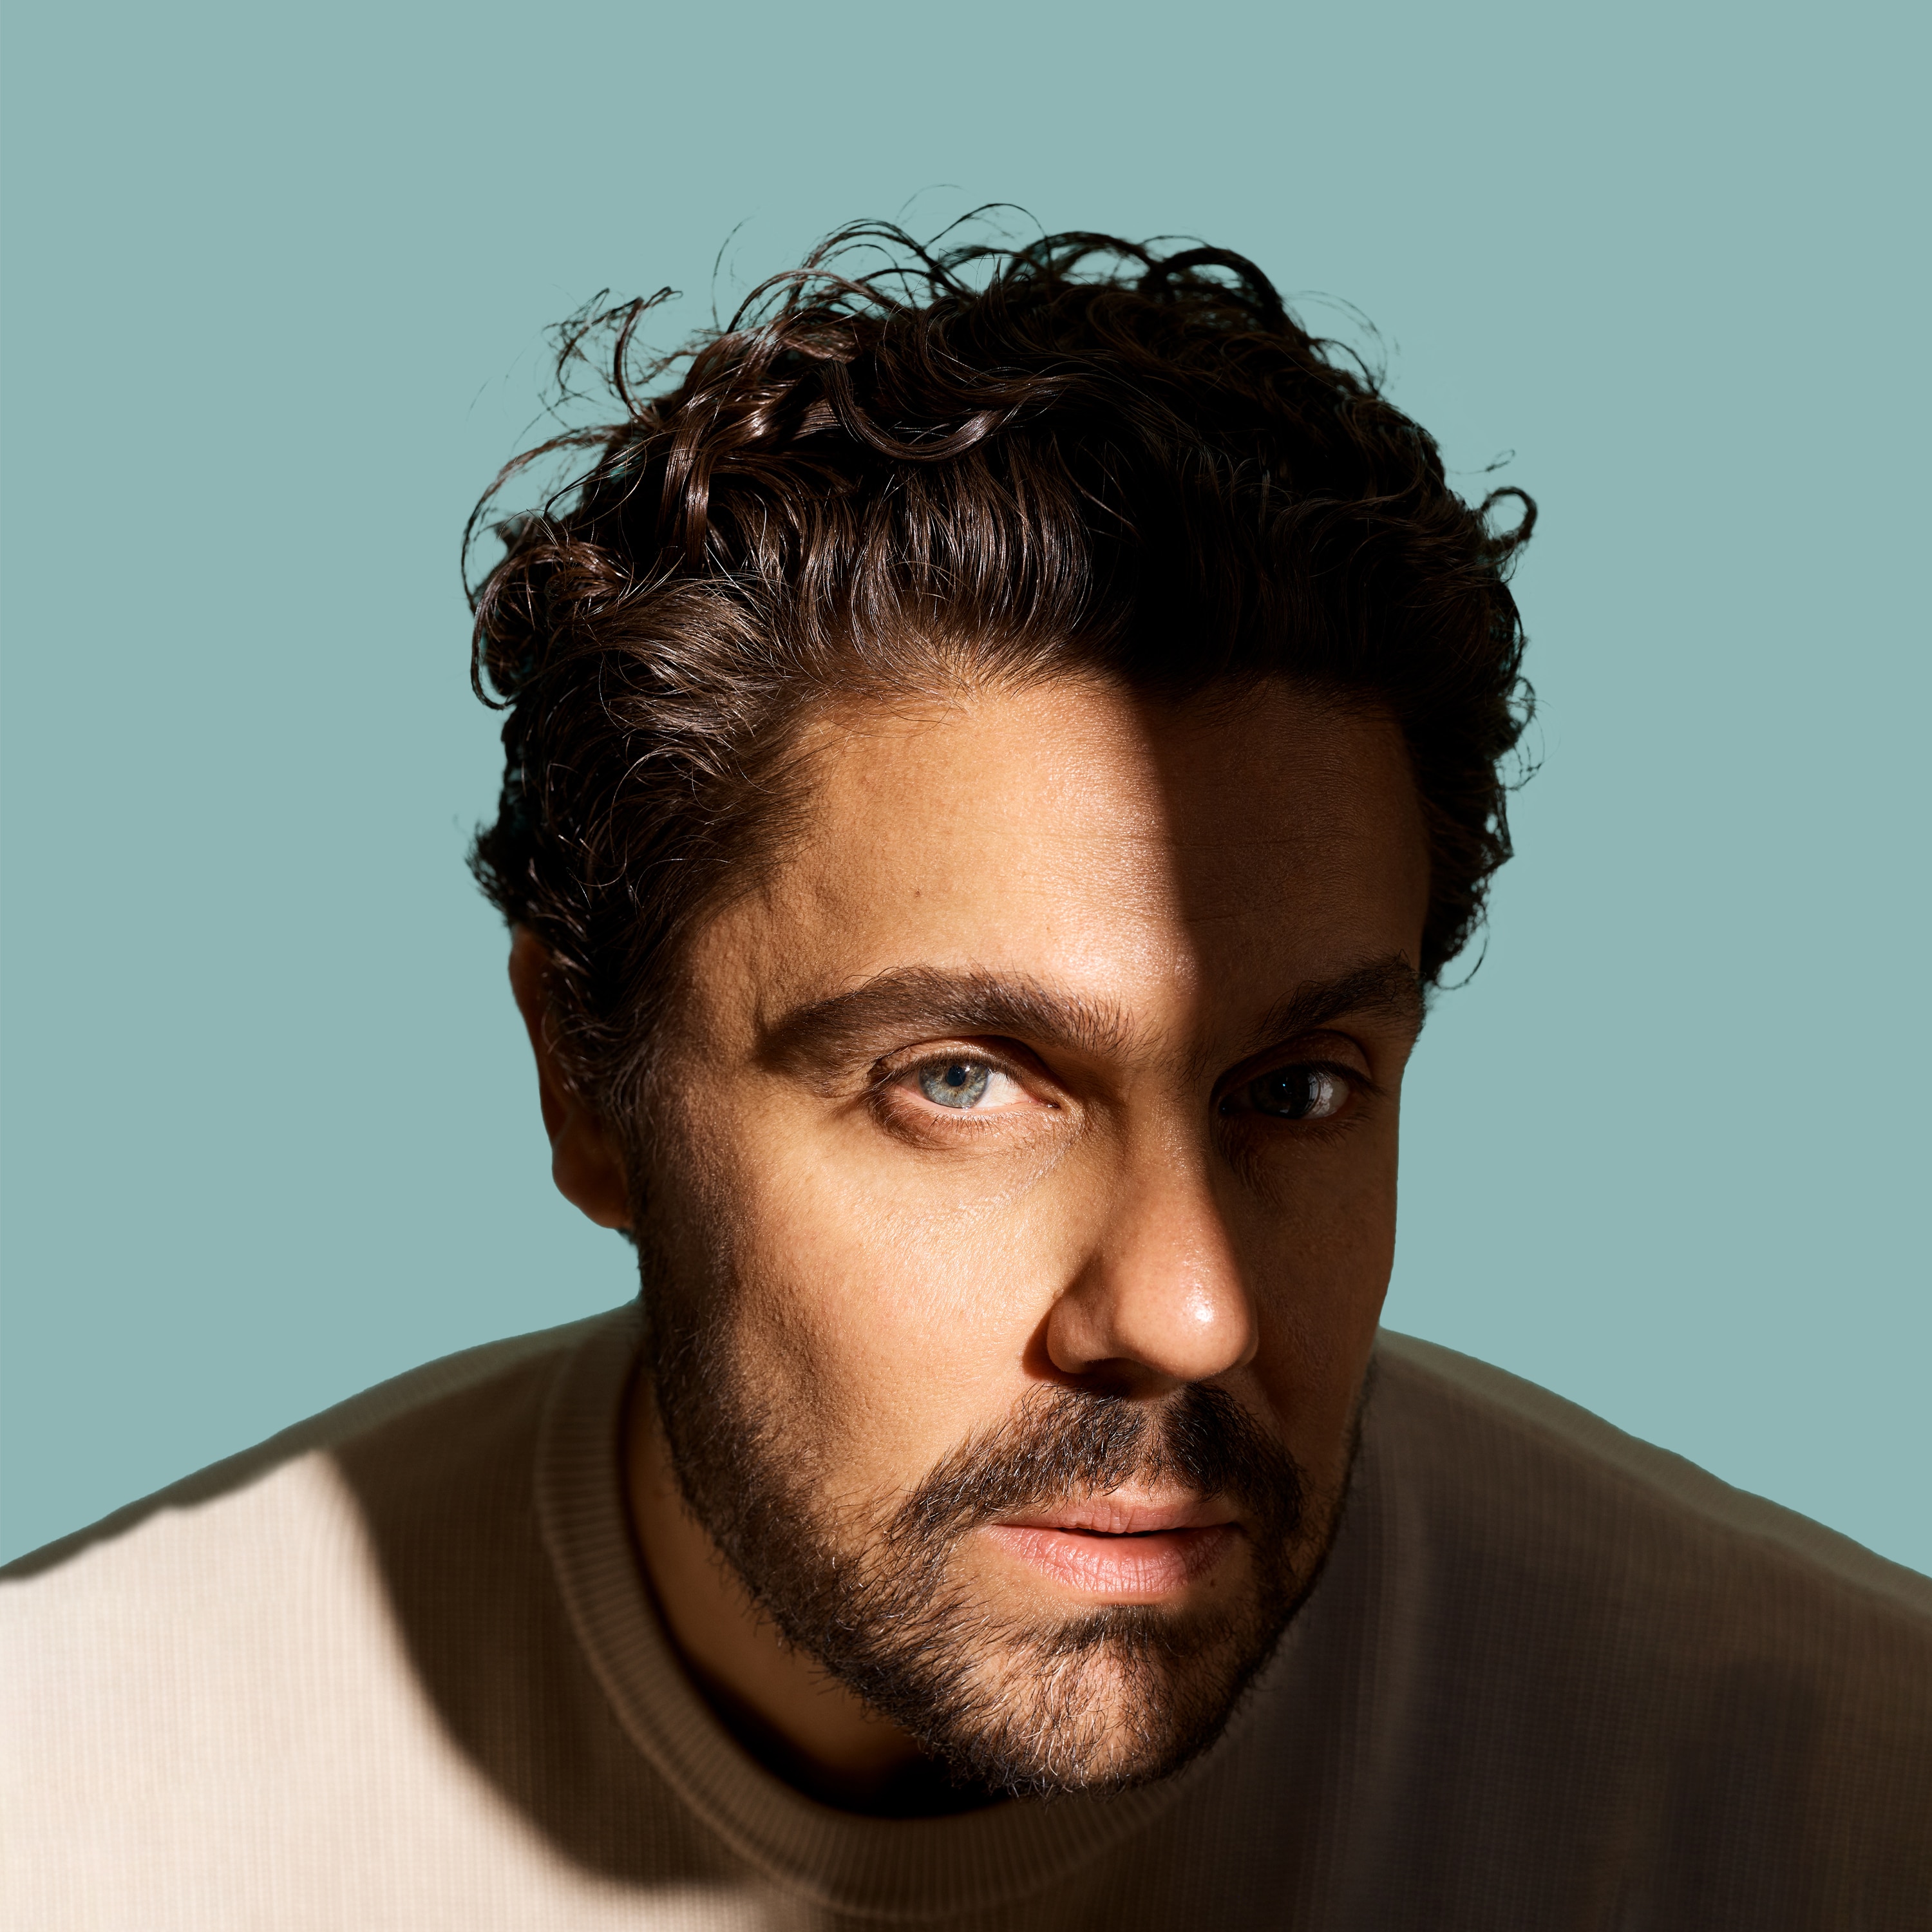 Dan Sultan is taking back control, and Danny Eastwood talks through his art